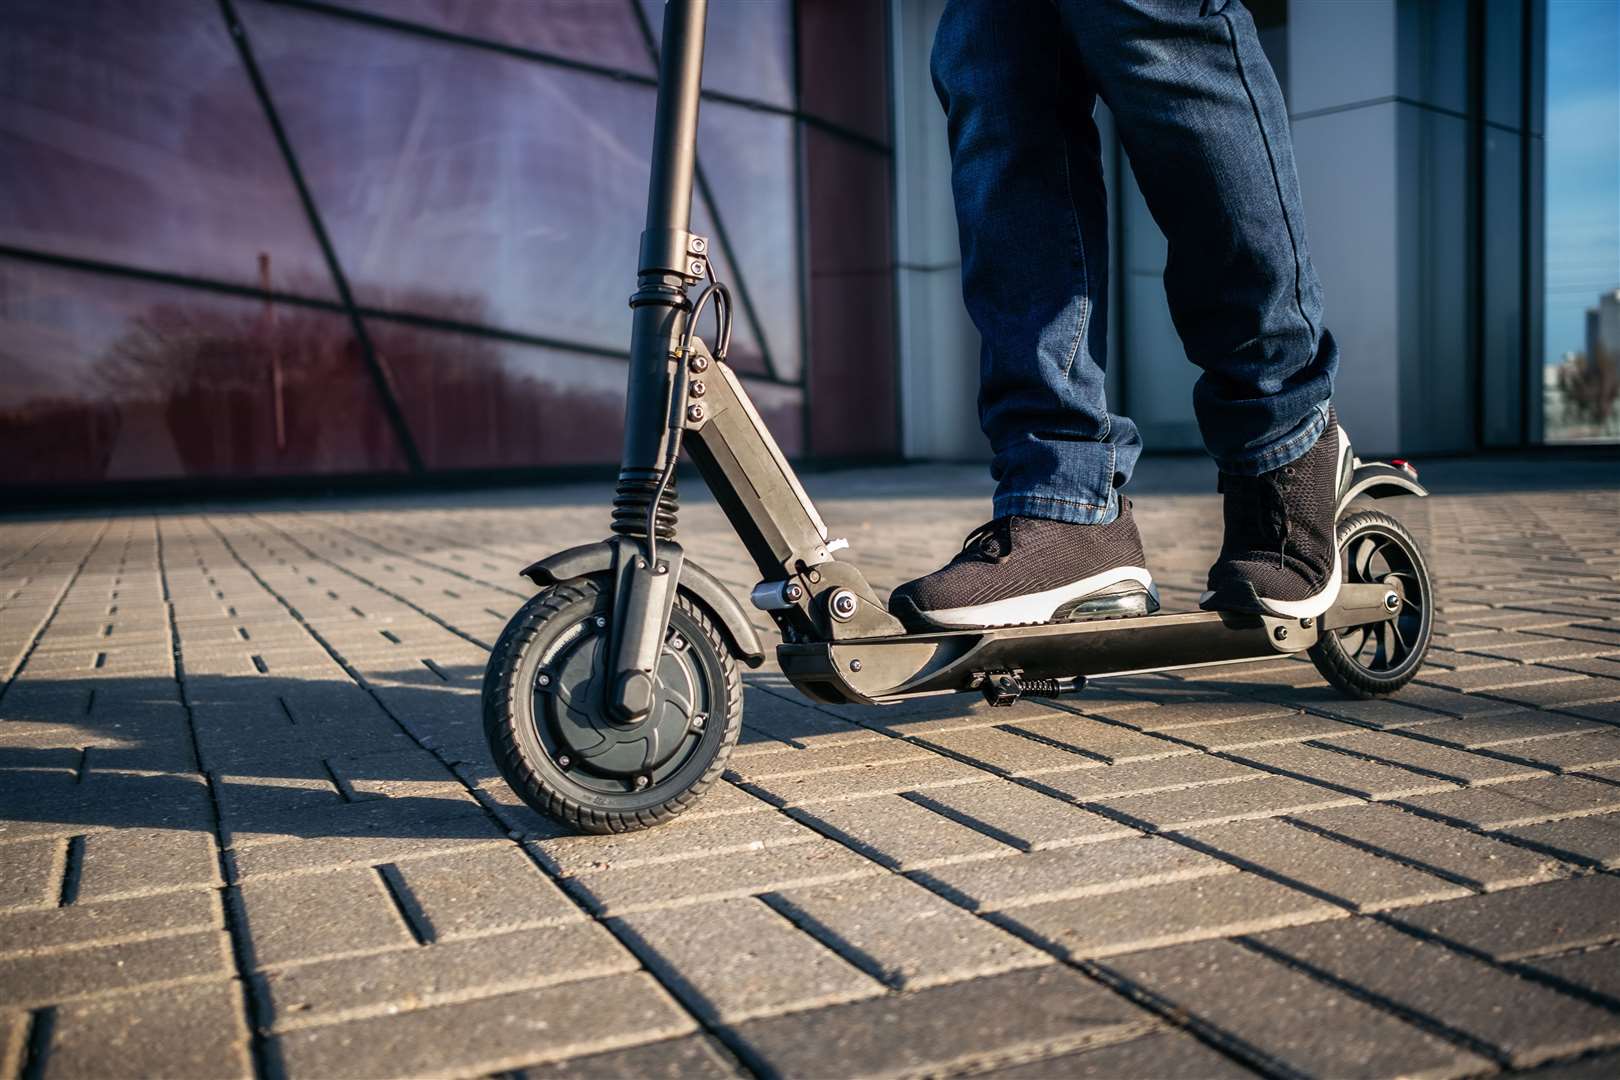 The teenager was riding an electric scooter. Stock picture: Getty Images/iStock